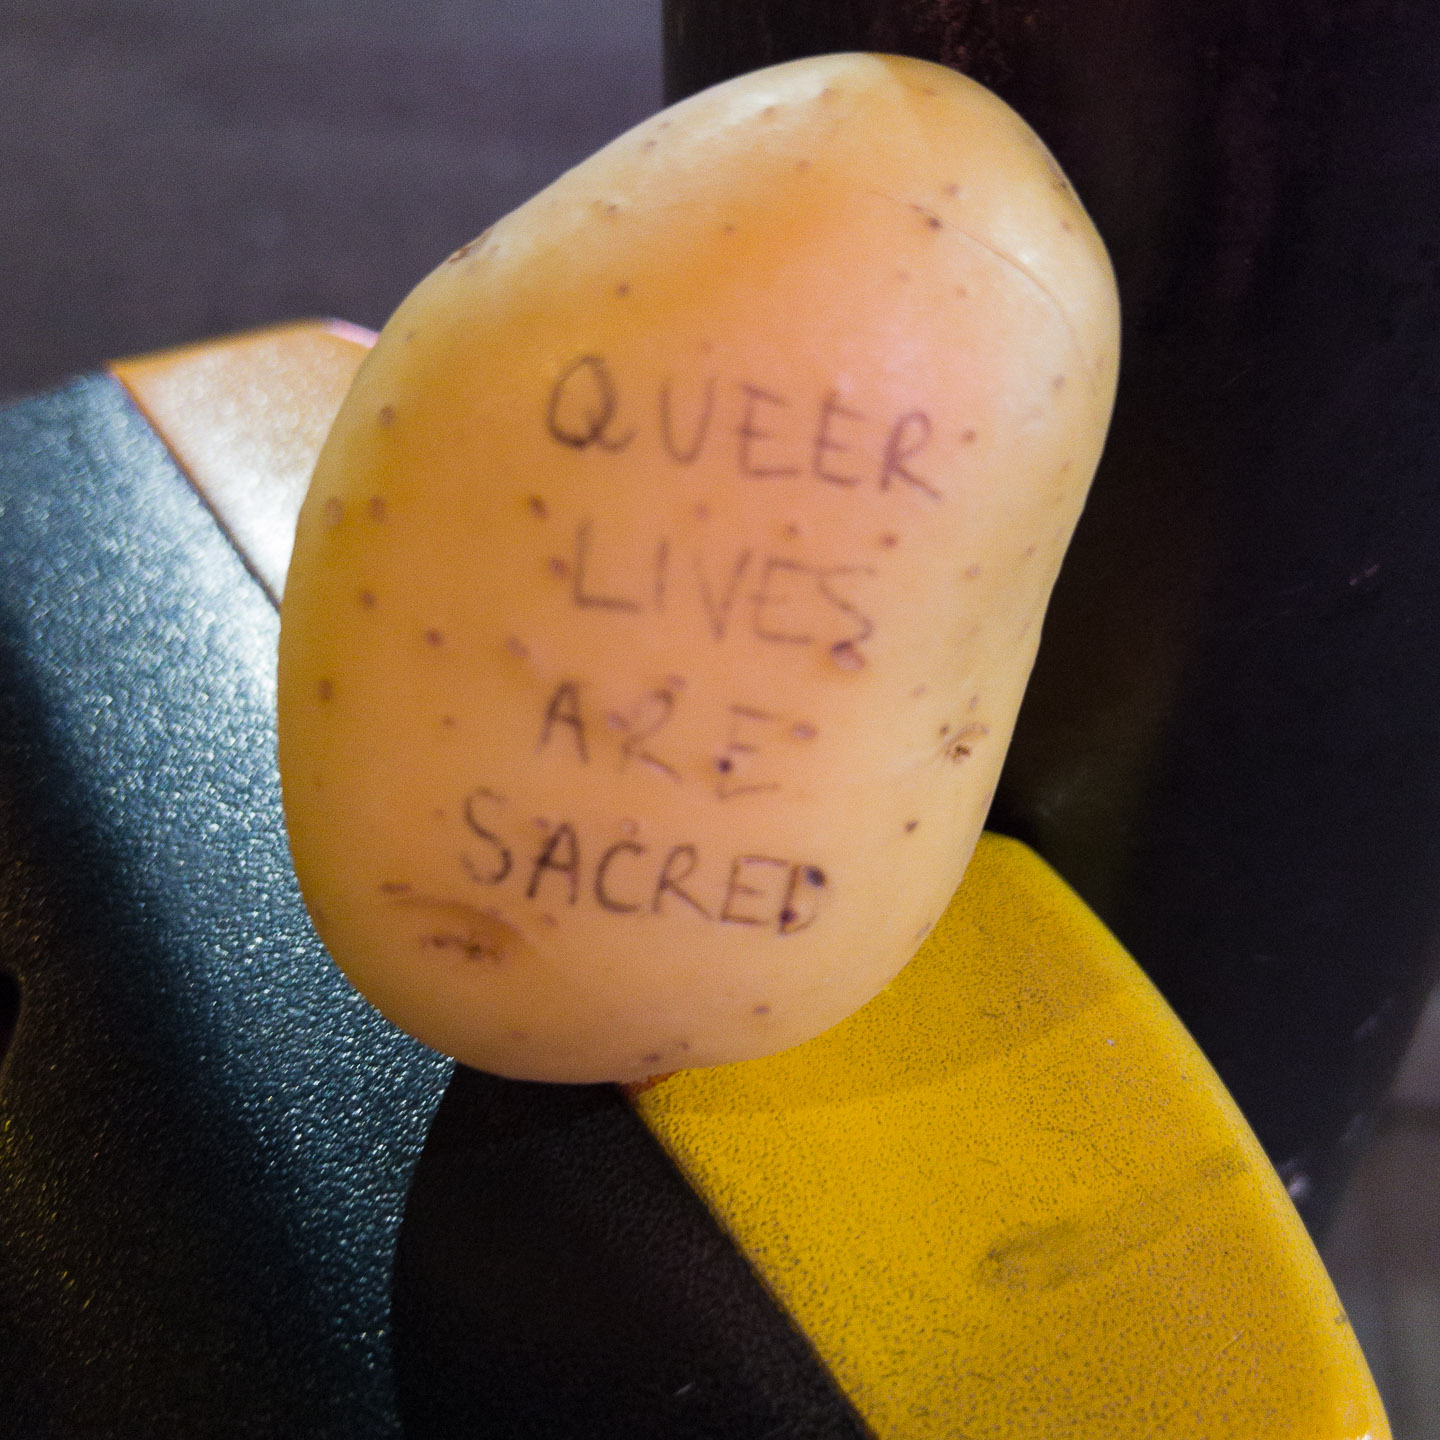 Potato with 'Queer Spaces are Sacred' written on it